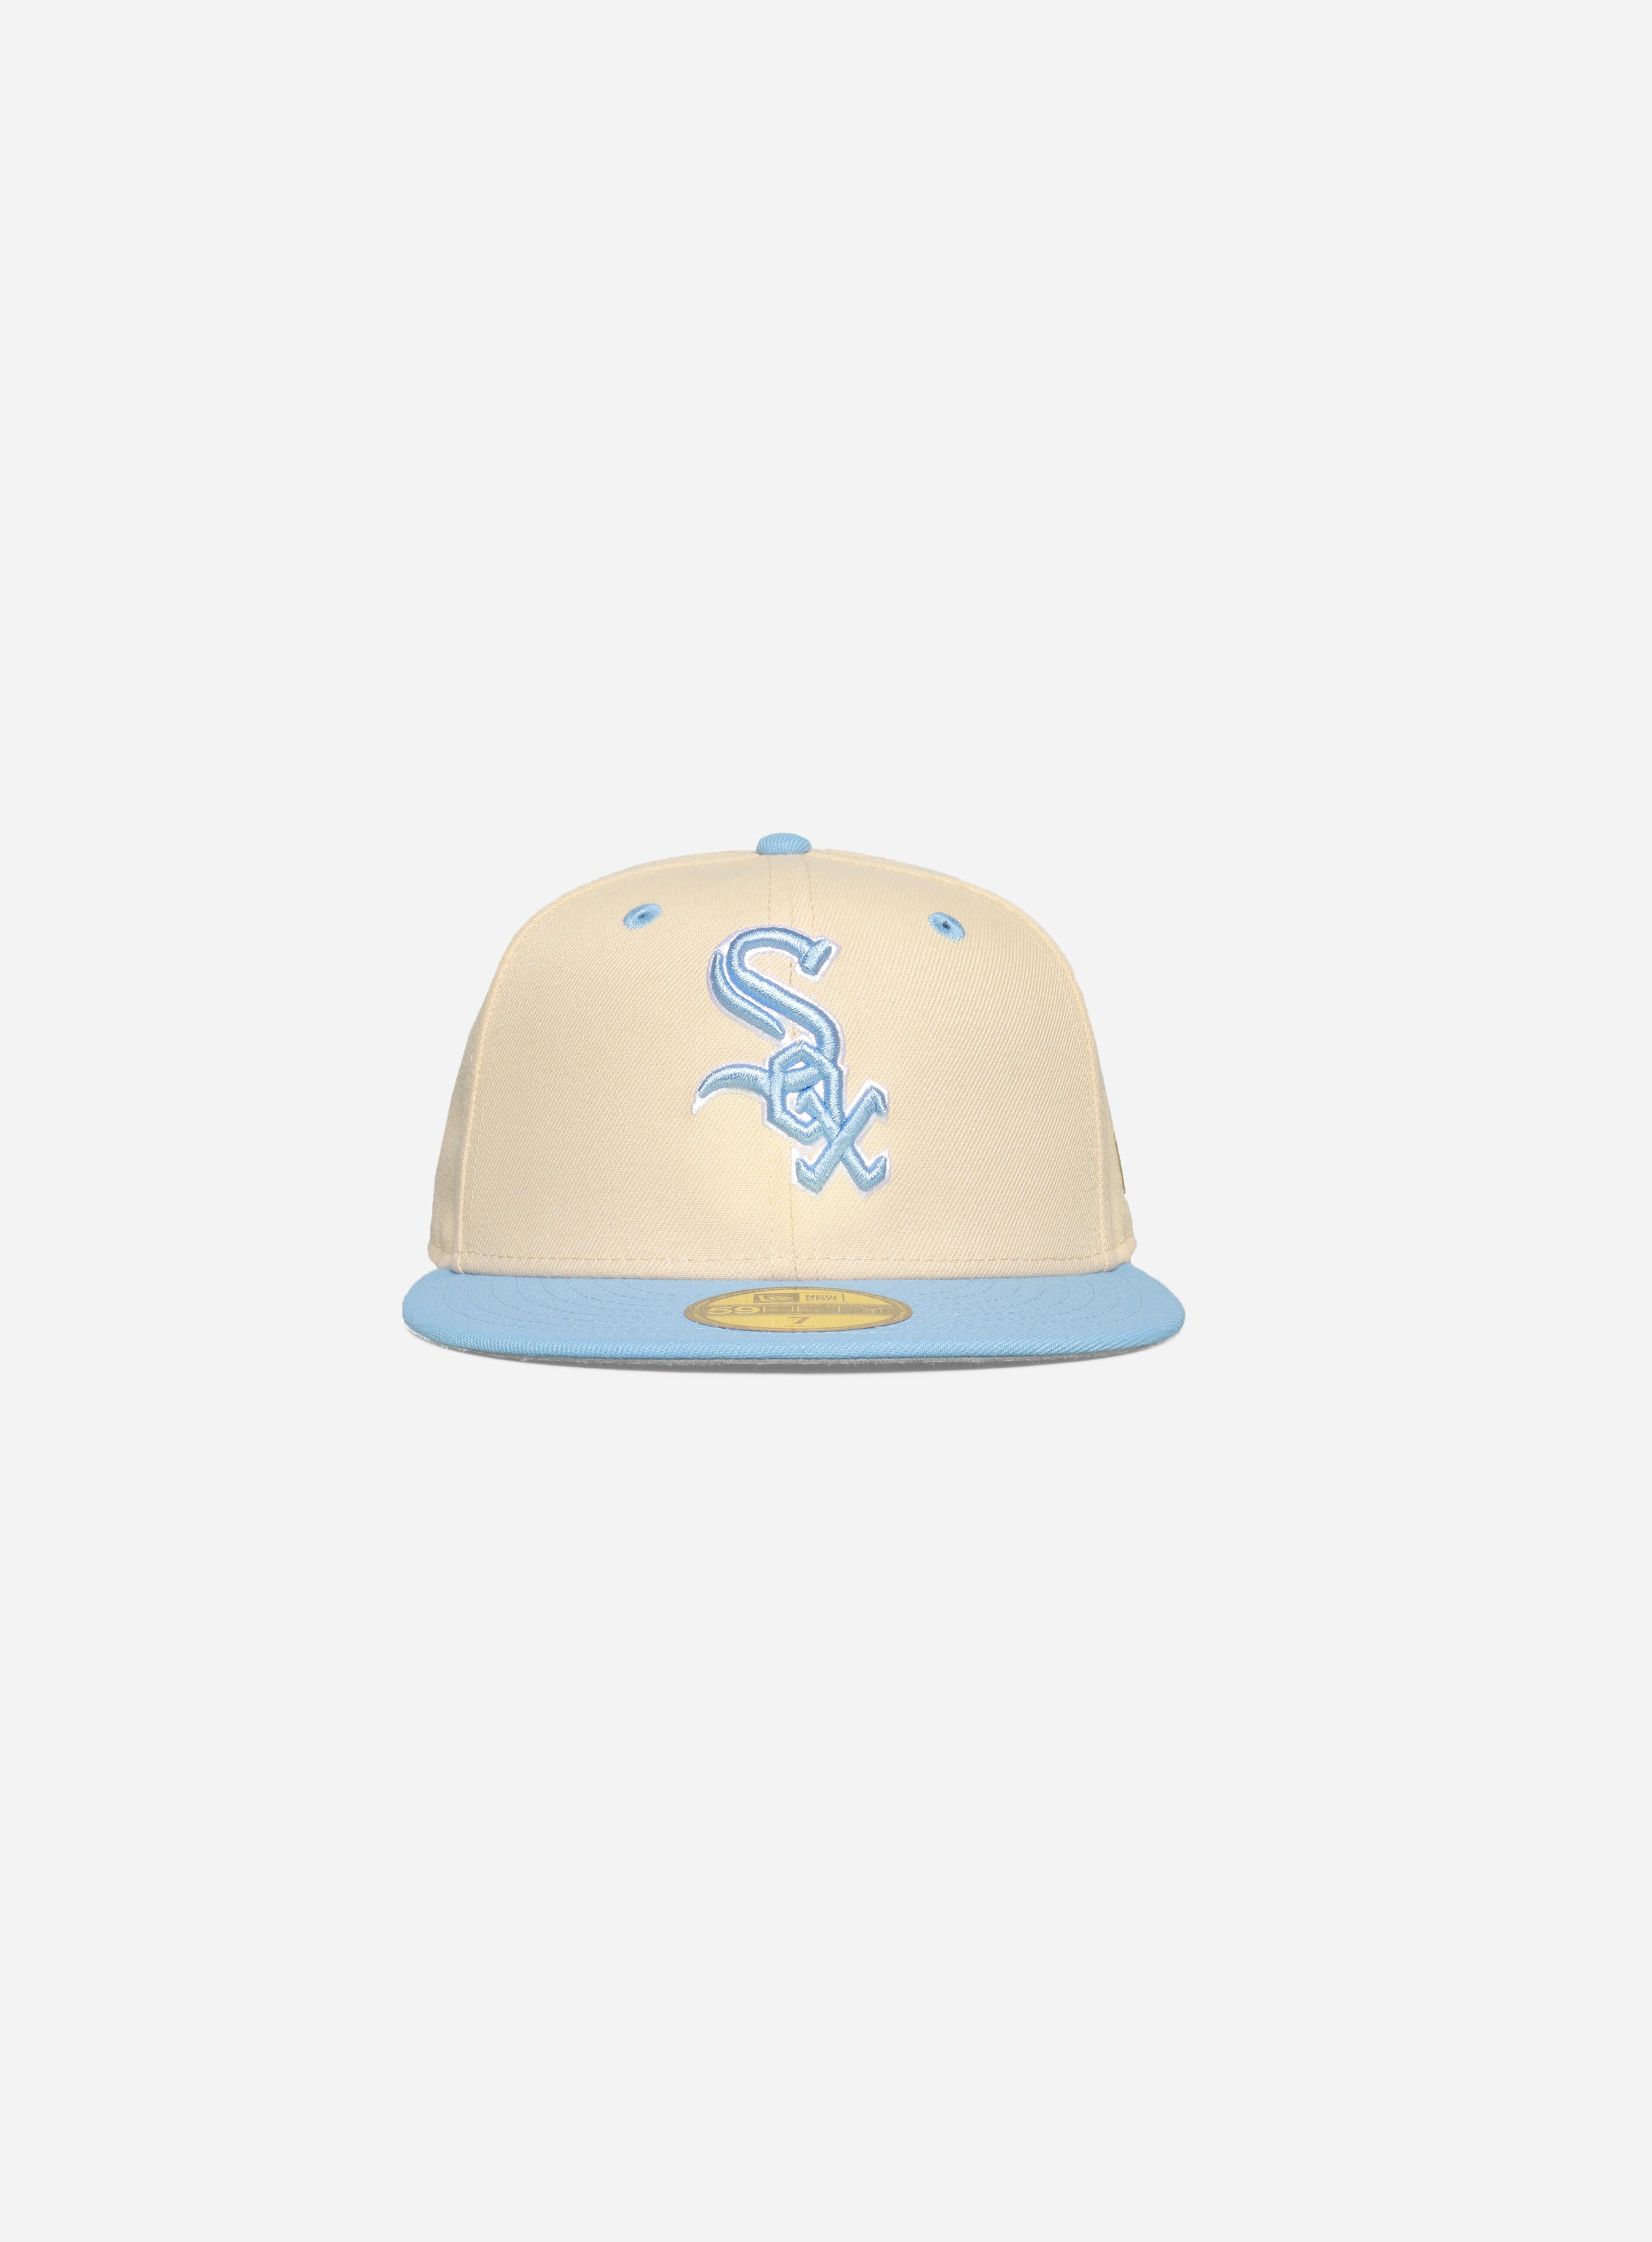 Chicago White Sox Iced Latte 59Fifty Fitted